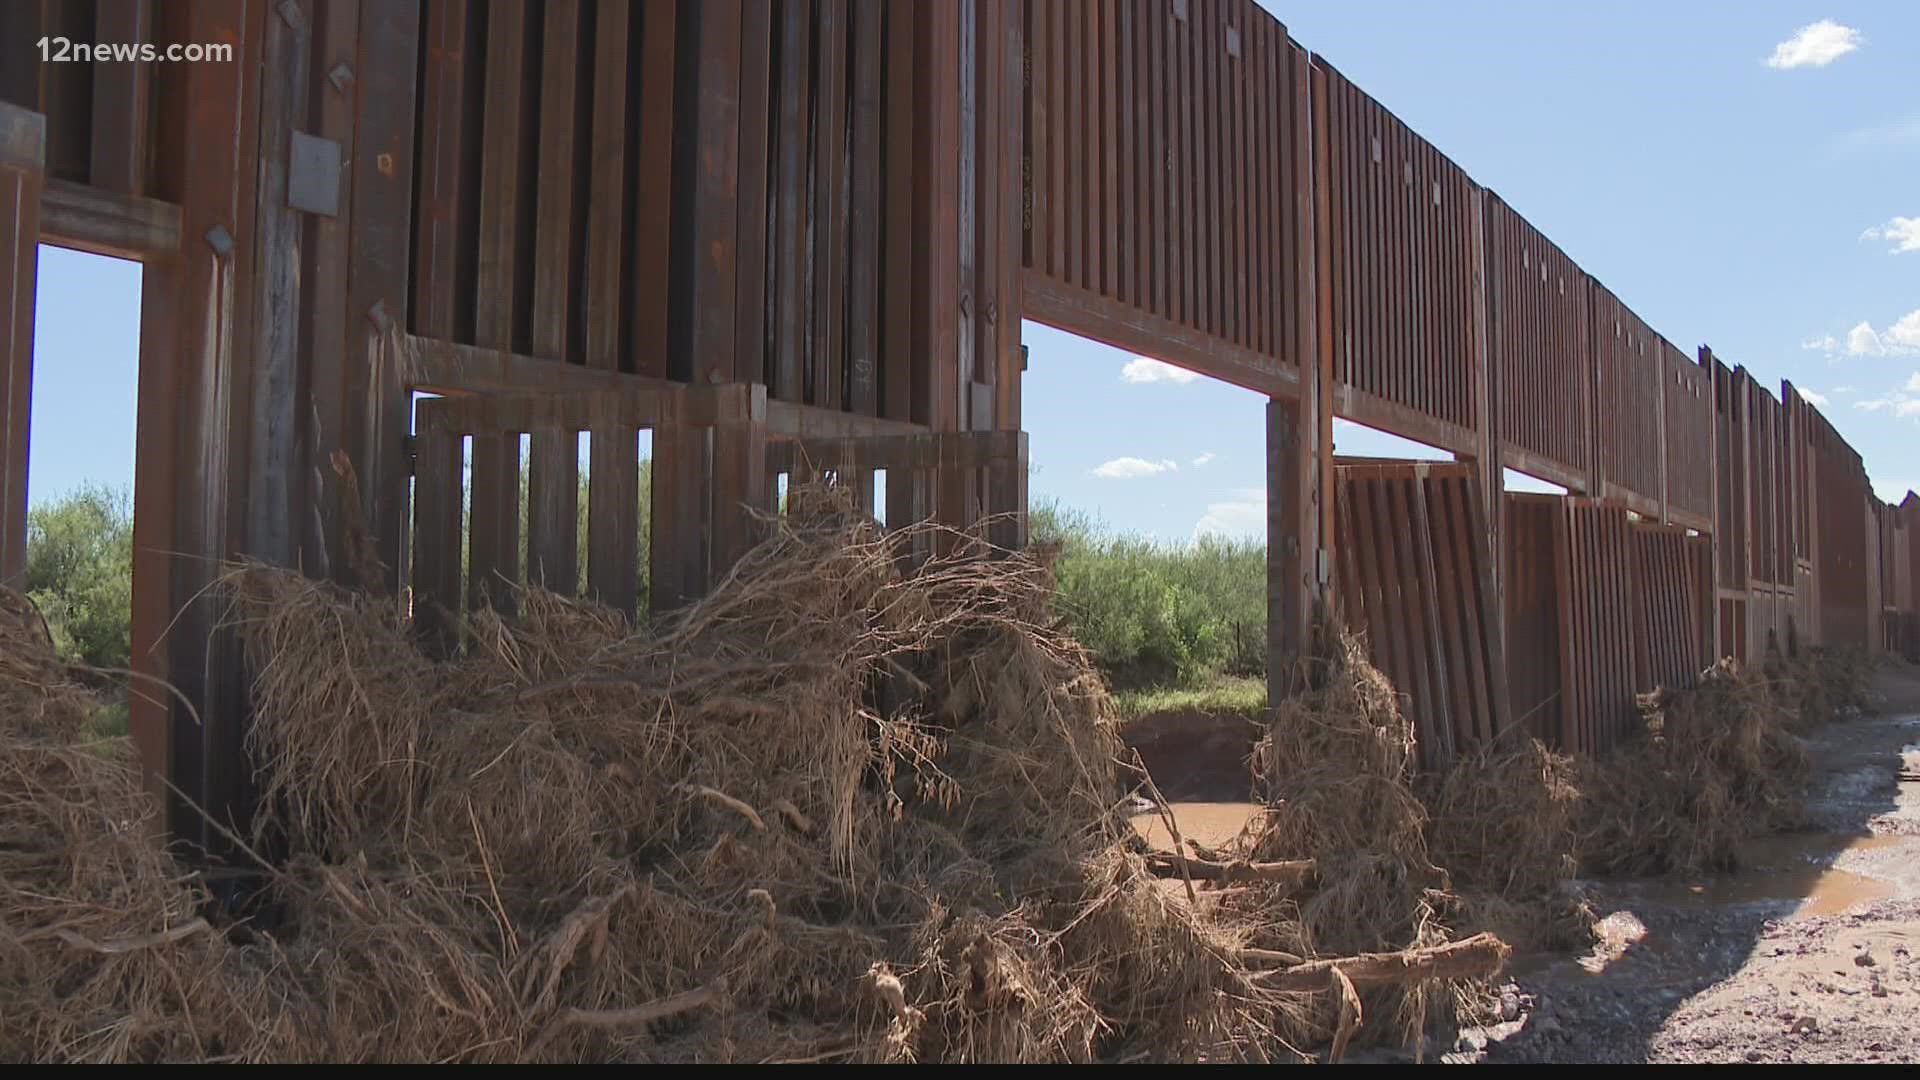 Monsoon floods have ripped off parts of the new, $15 billion border wall near Douglas, AZ. Twisted metal, missing gates and flood debris entangle the wall.